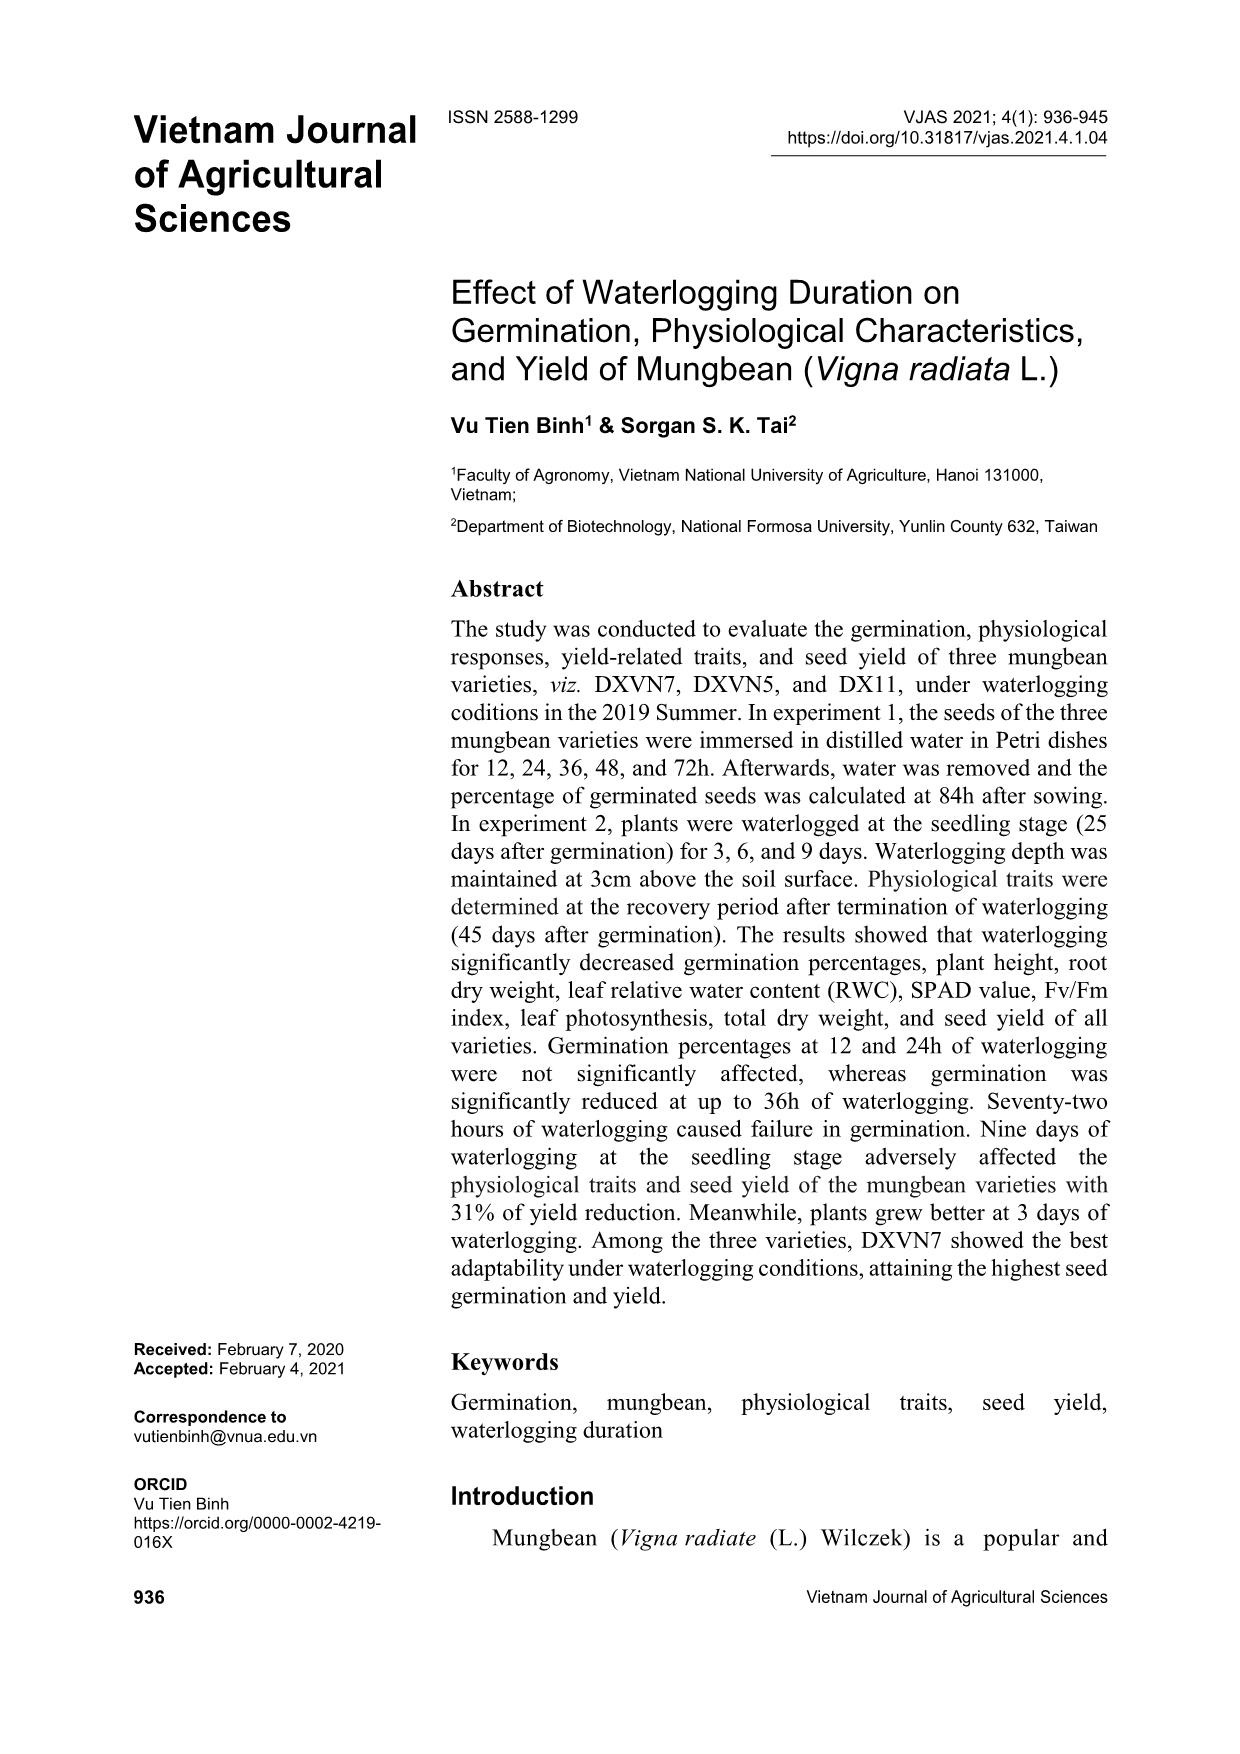 Effect of waterlogging duration on germination, physiological characteristics, and yield of mungbean (Vigna radiata L.) trang 1